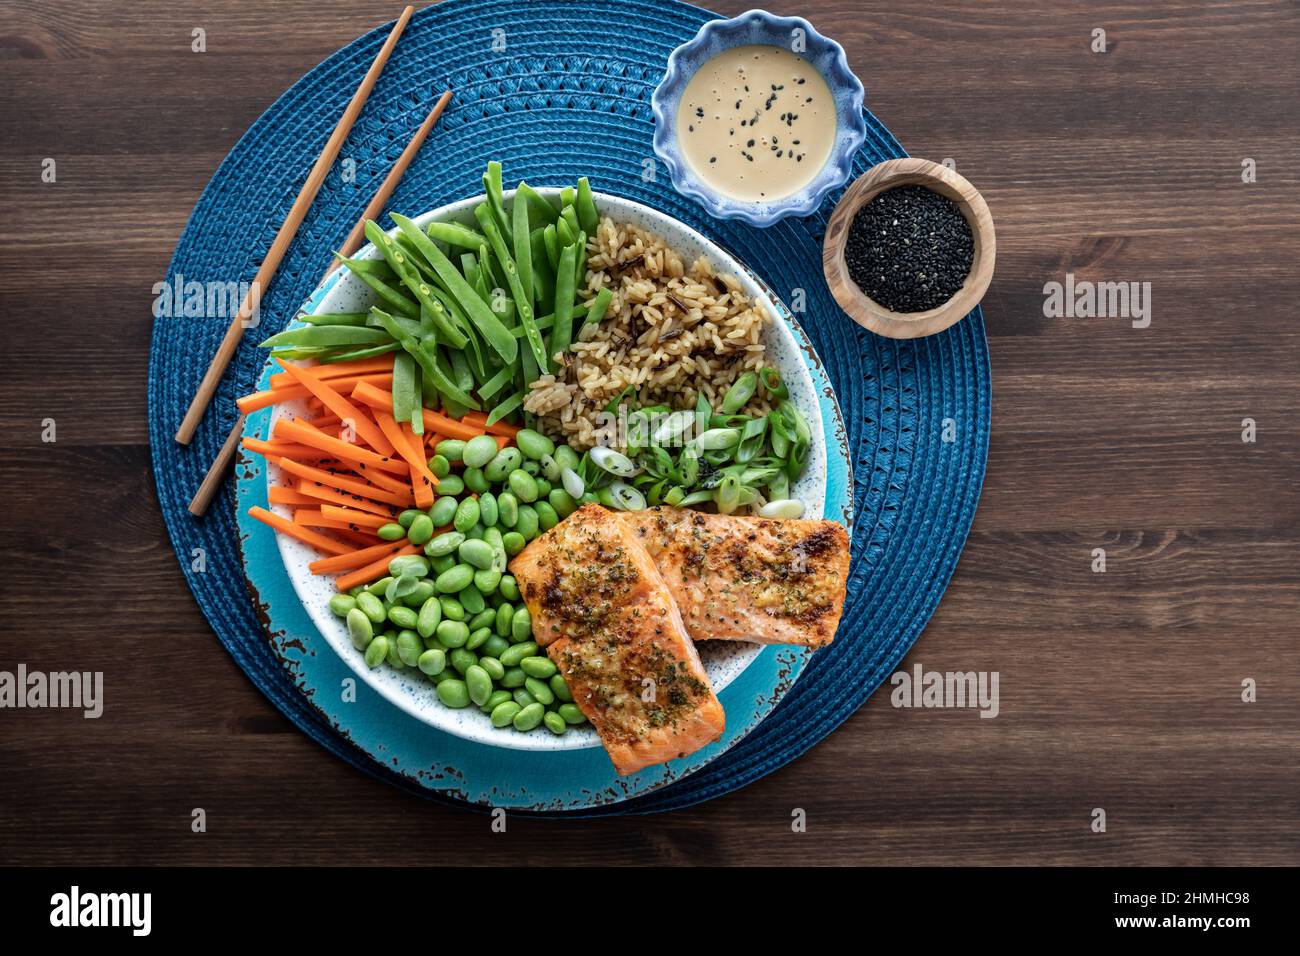 Top down view of an Asian salmon salad bowl with toppings on a wooden table. Stock Photo